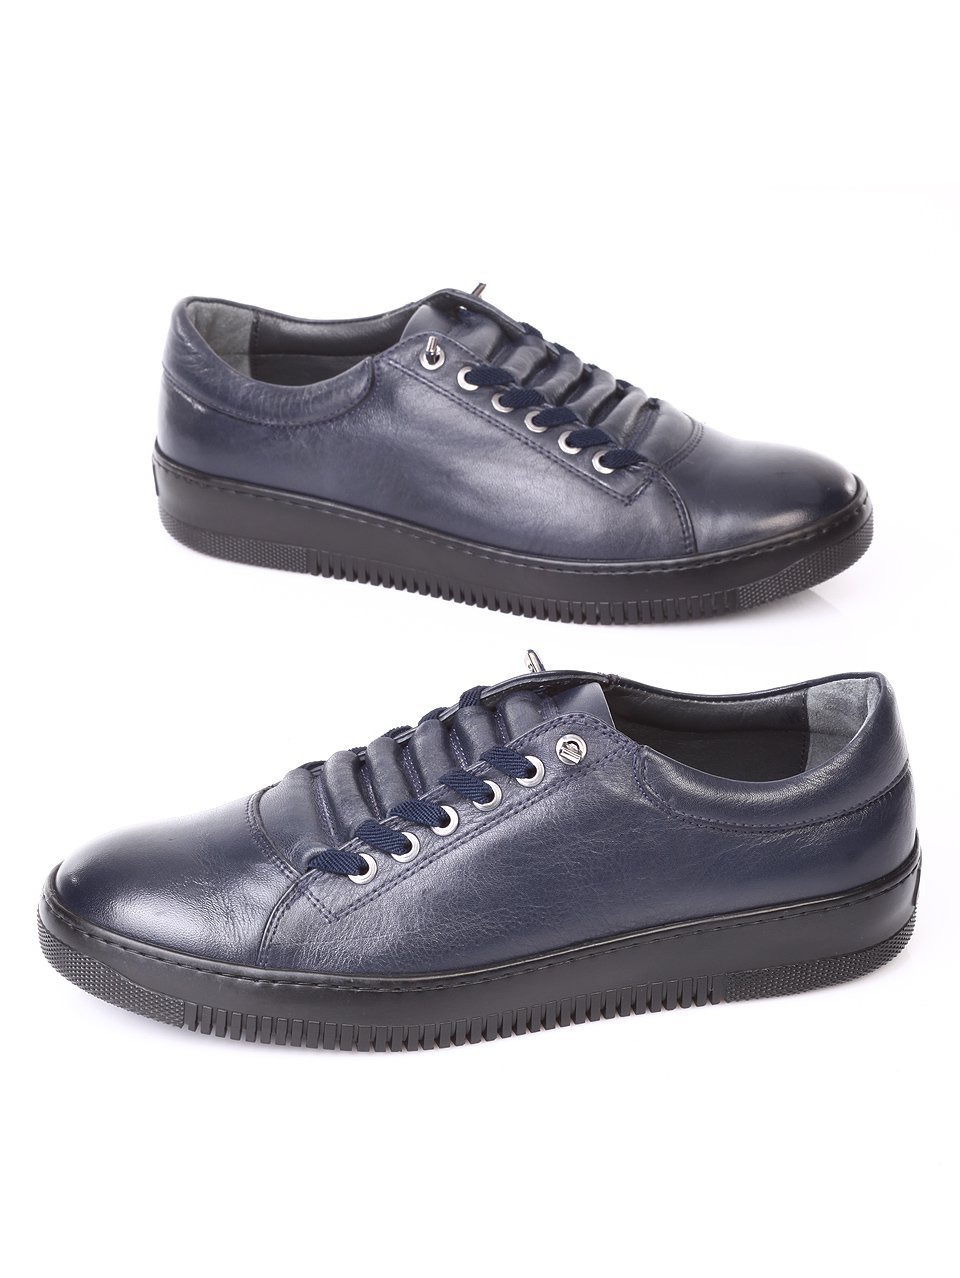  7AT-171127 blue leather